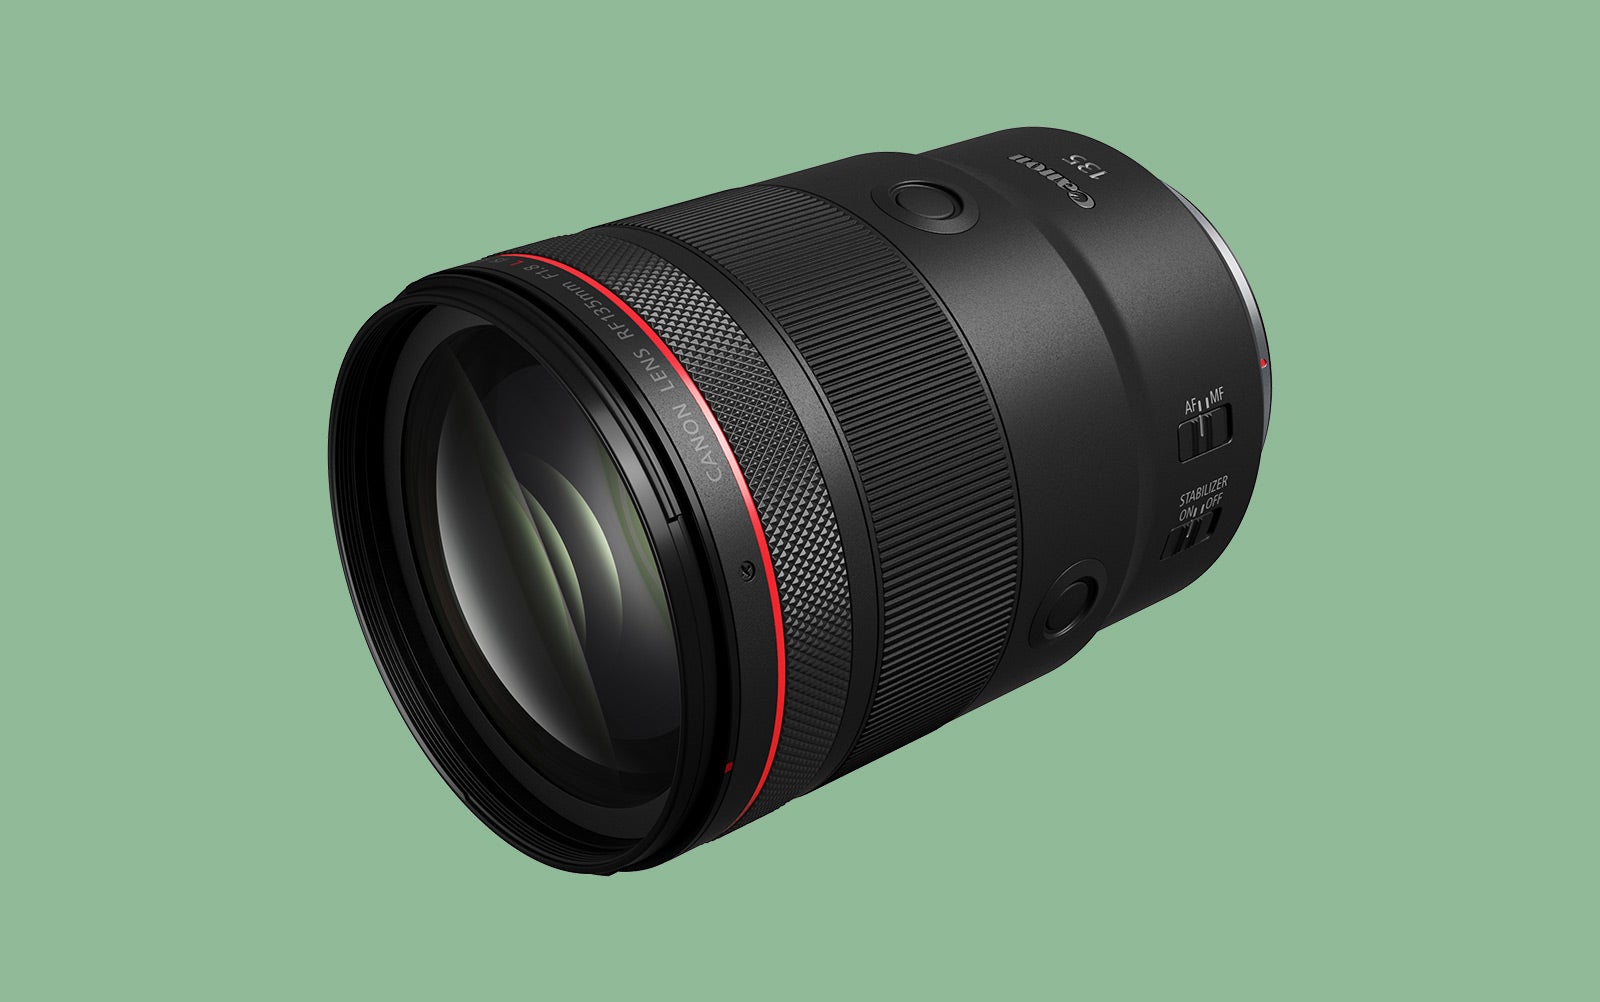 Canon has announced the RF 135mm F1.8 L IS USM lens.